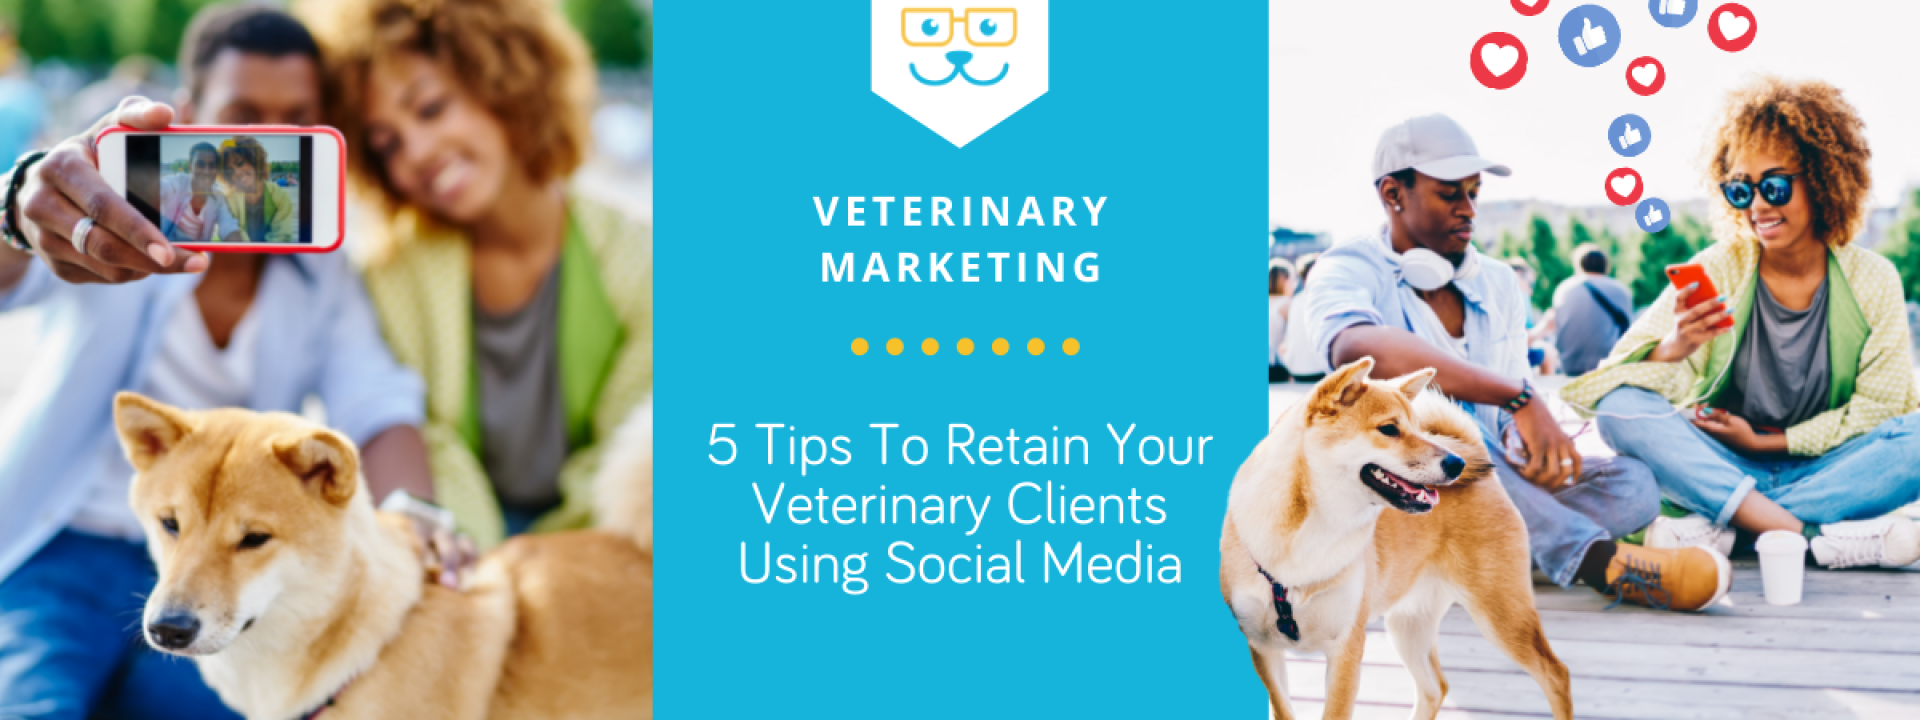 5 Tips To Retain Your Veterinary Clients Using Social Media